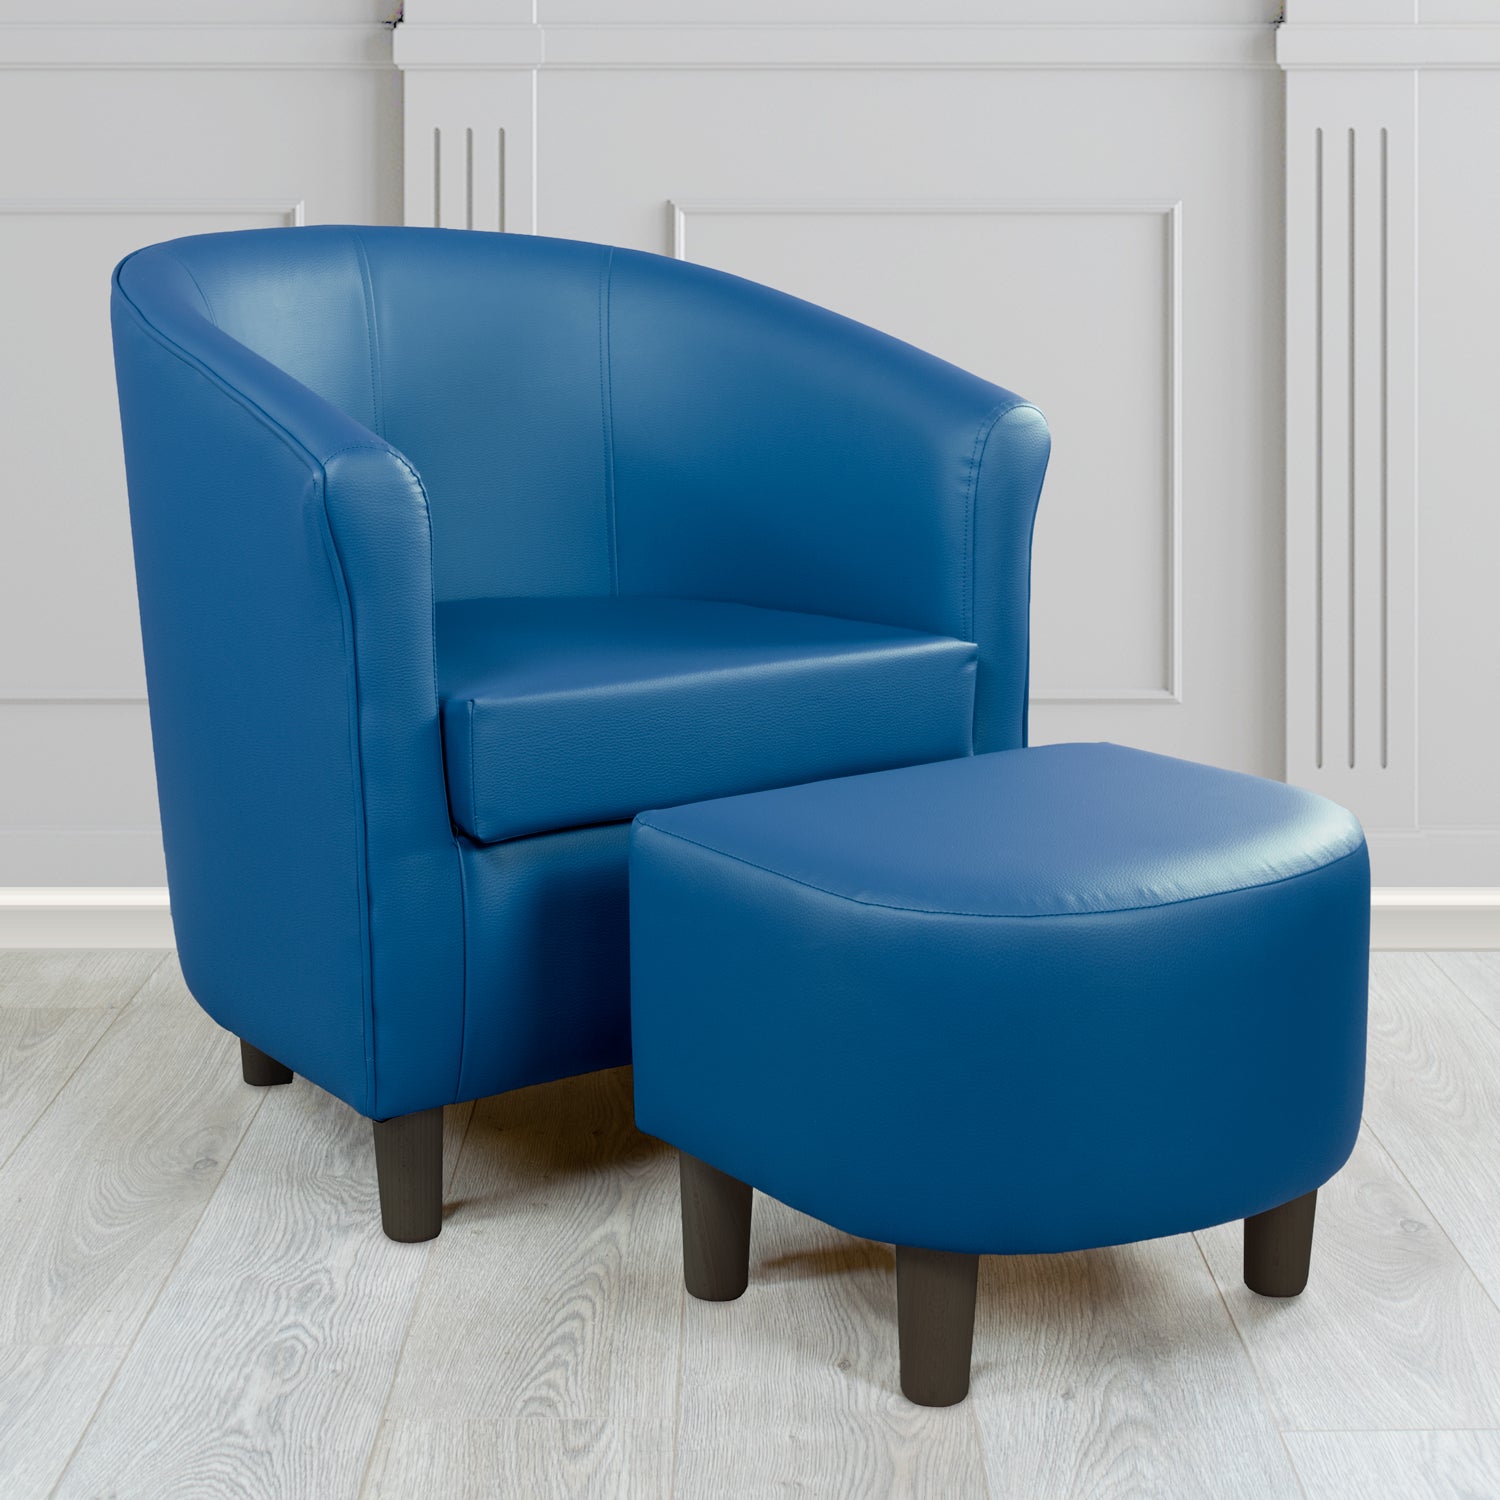 Tuscany Just Colour Ocean Blue Faux Leather Tub Chair with Footstool Set - The Tub Chair Shop